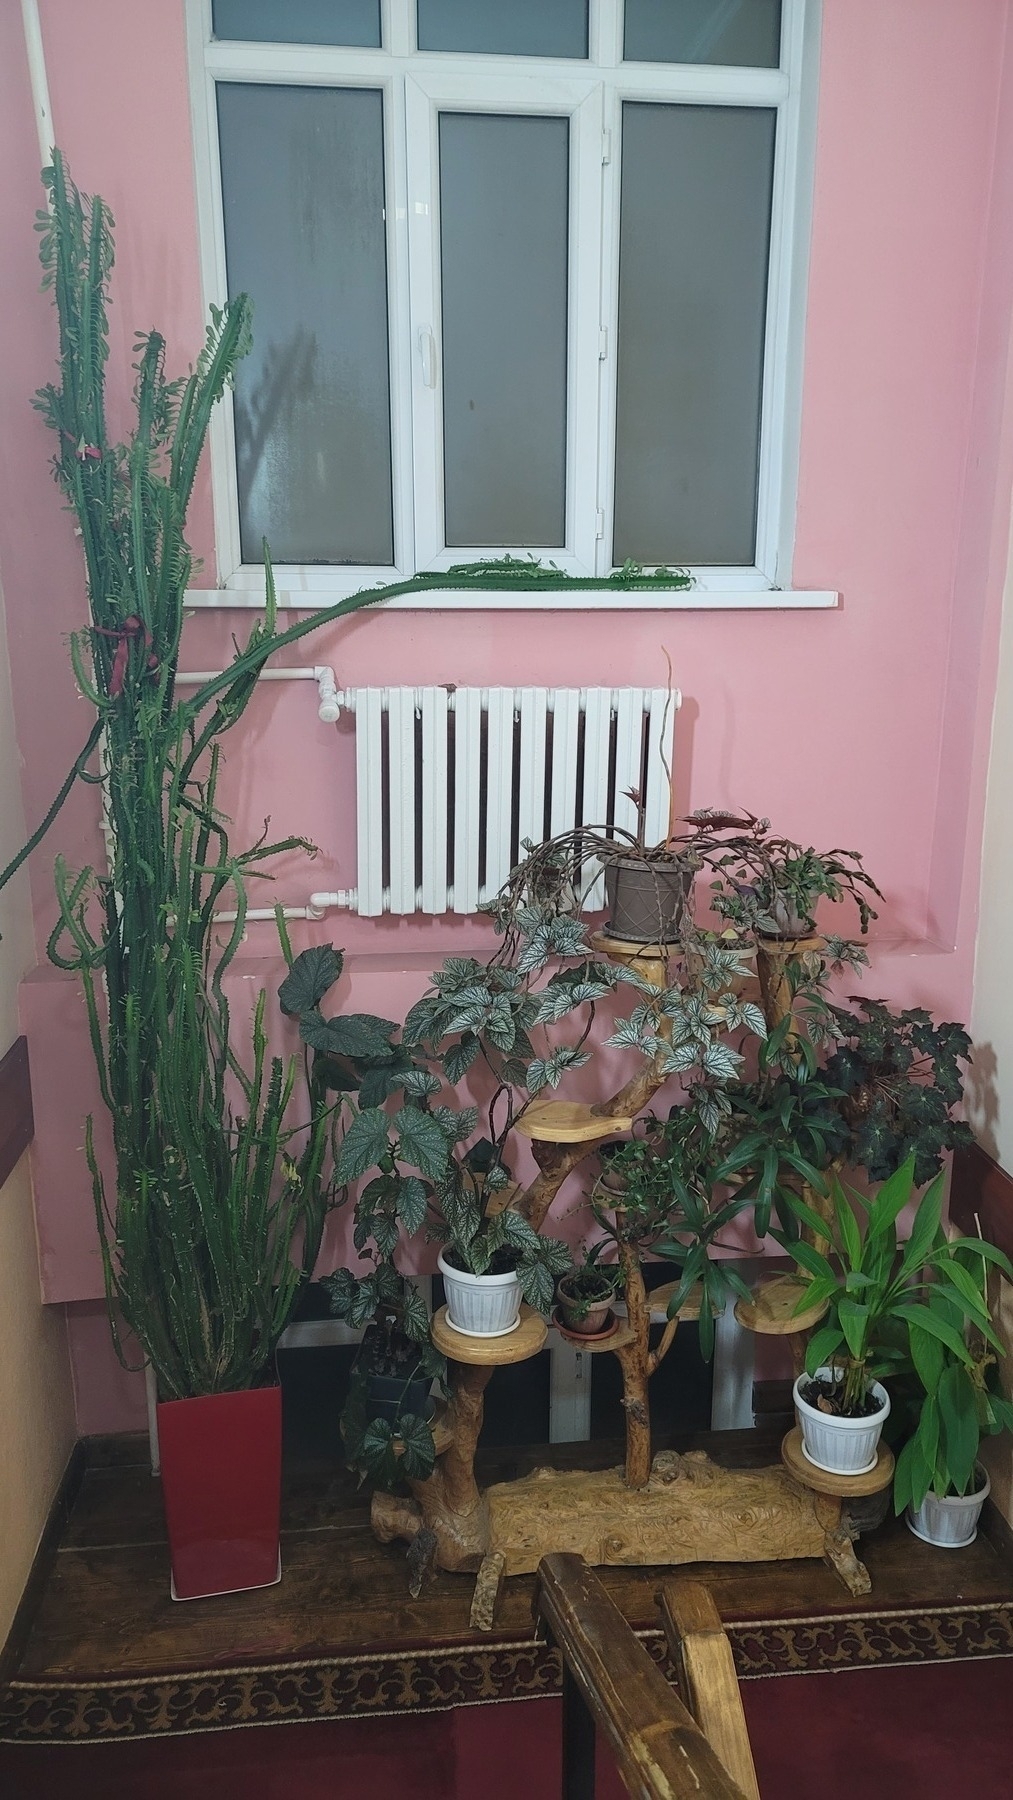 house plants in a line against a pink wall next to a staircase. white radiator on the wall above the plants, and a window on the wall above the radiator